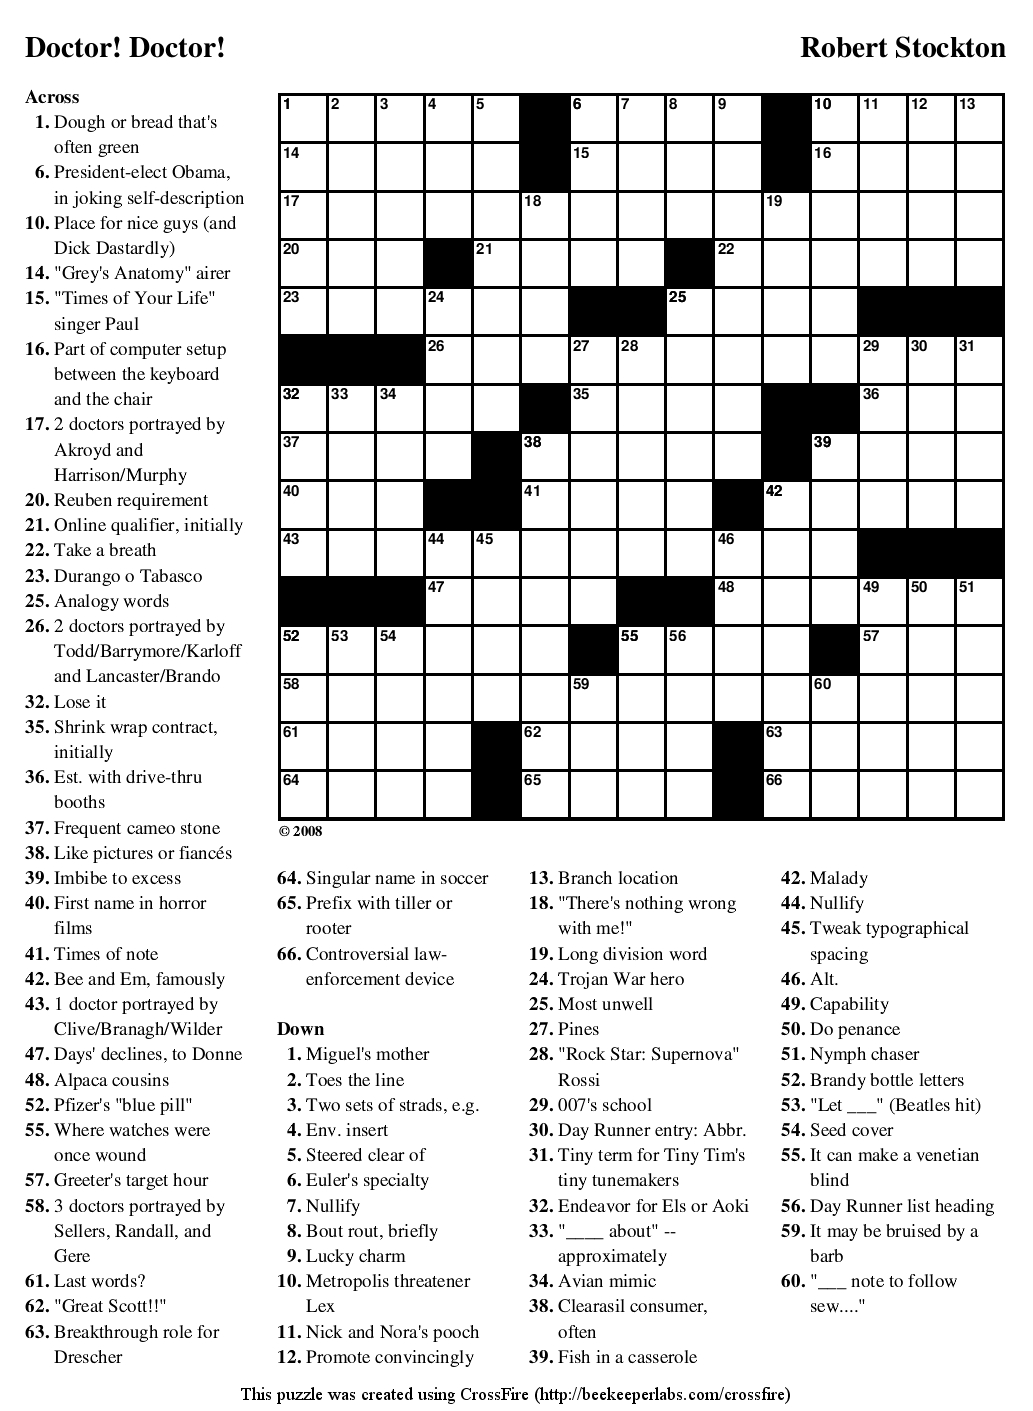 Crossword Puzzles Printable - Yahoo Image Search Results | Crossword - Printable Crossword Puzzles July 2018